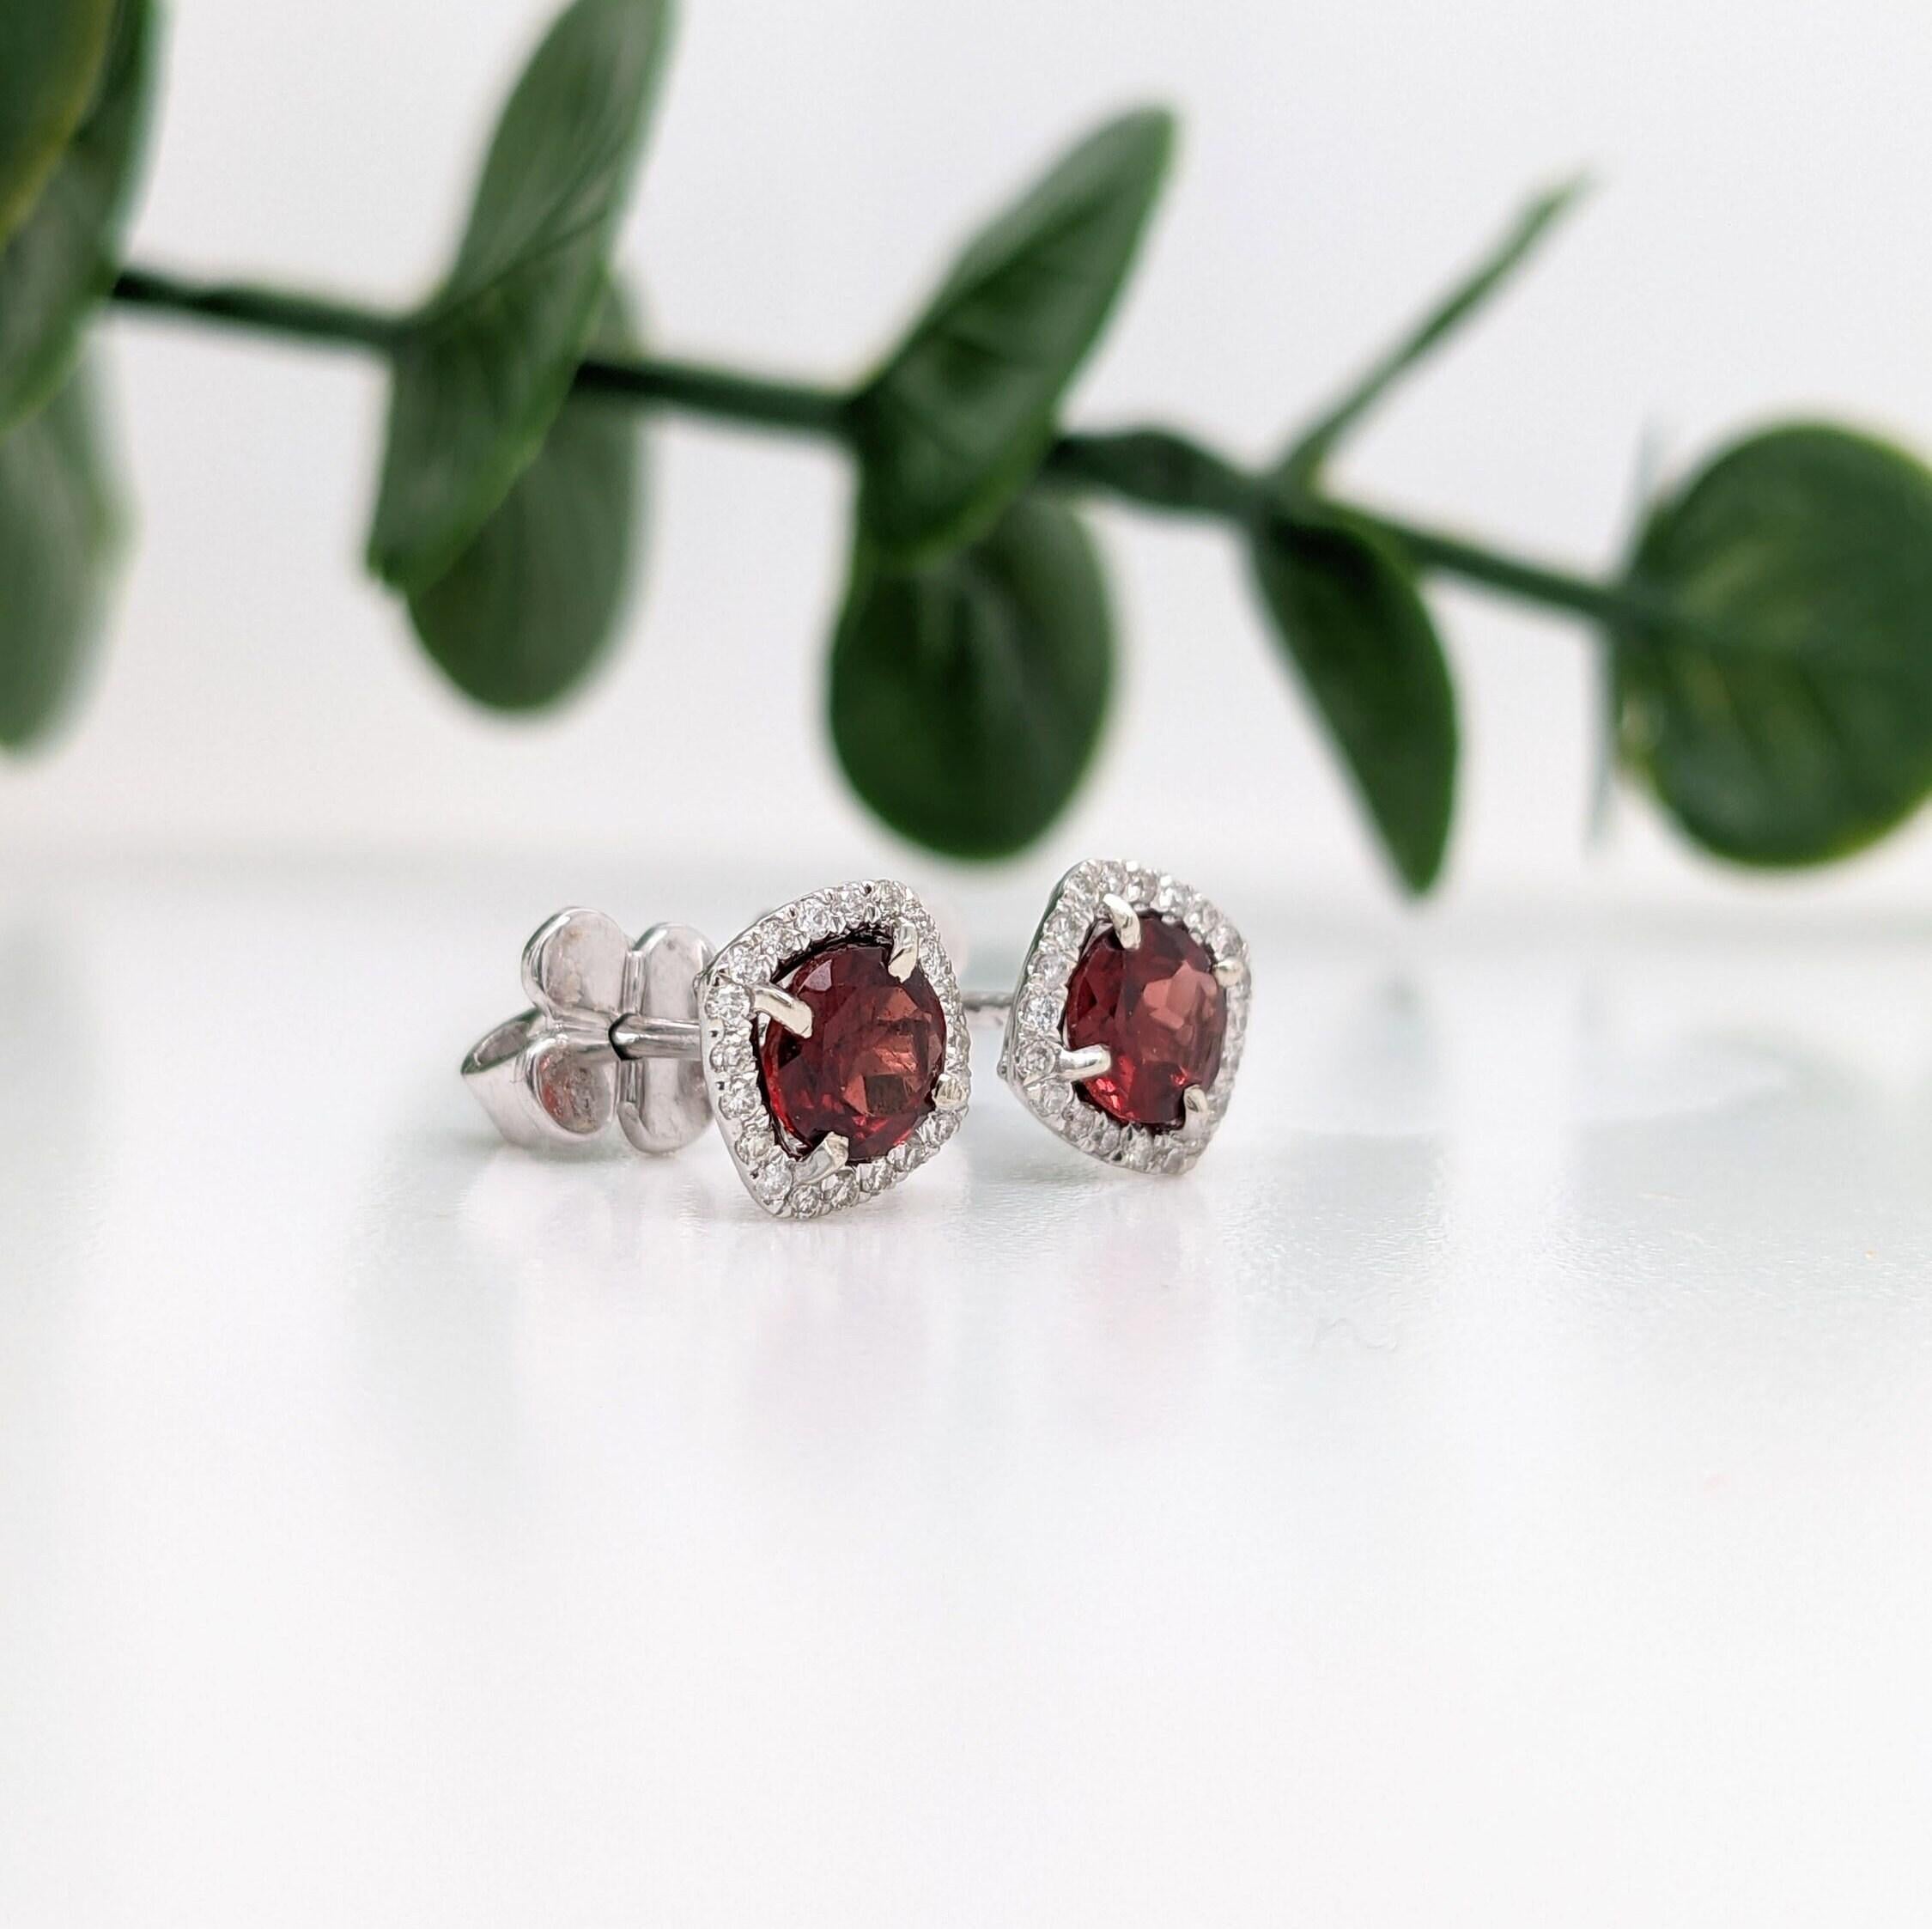 These everyday-wear, pushback studs features a 5mm red garnet gemstone and a natural diamond halo in 14k solid white gold. This piece is available as shown above, or can be customized to fit any stone (choose one from our collection, or use some of